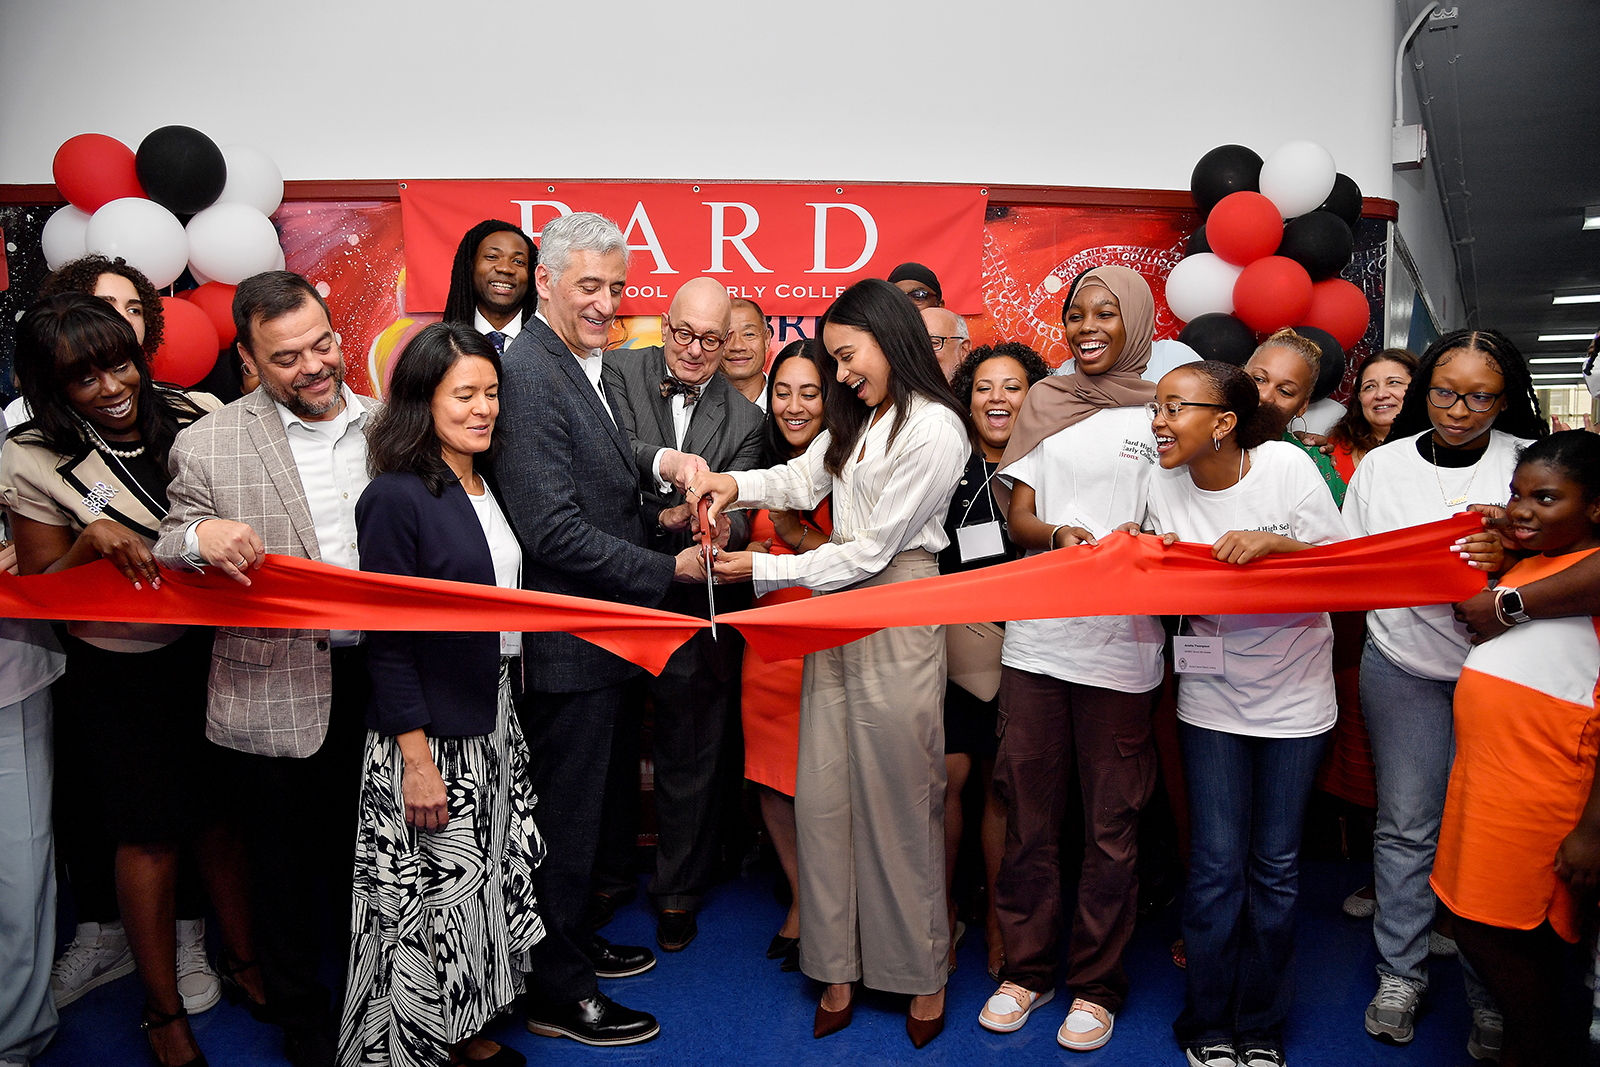 Bard High School Early College to Open New Campus in Brooklyn, New York